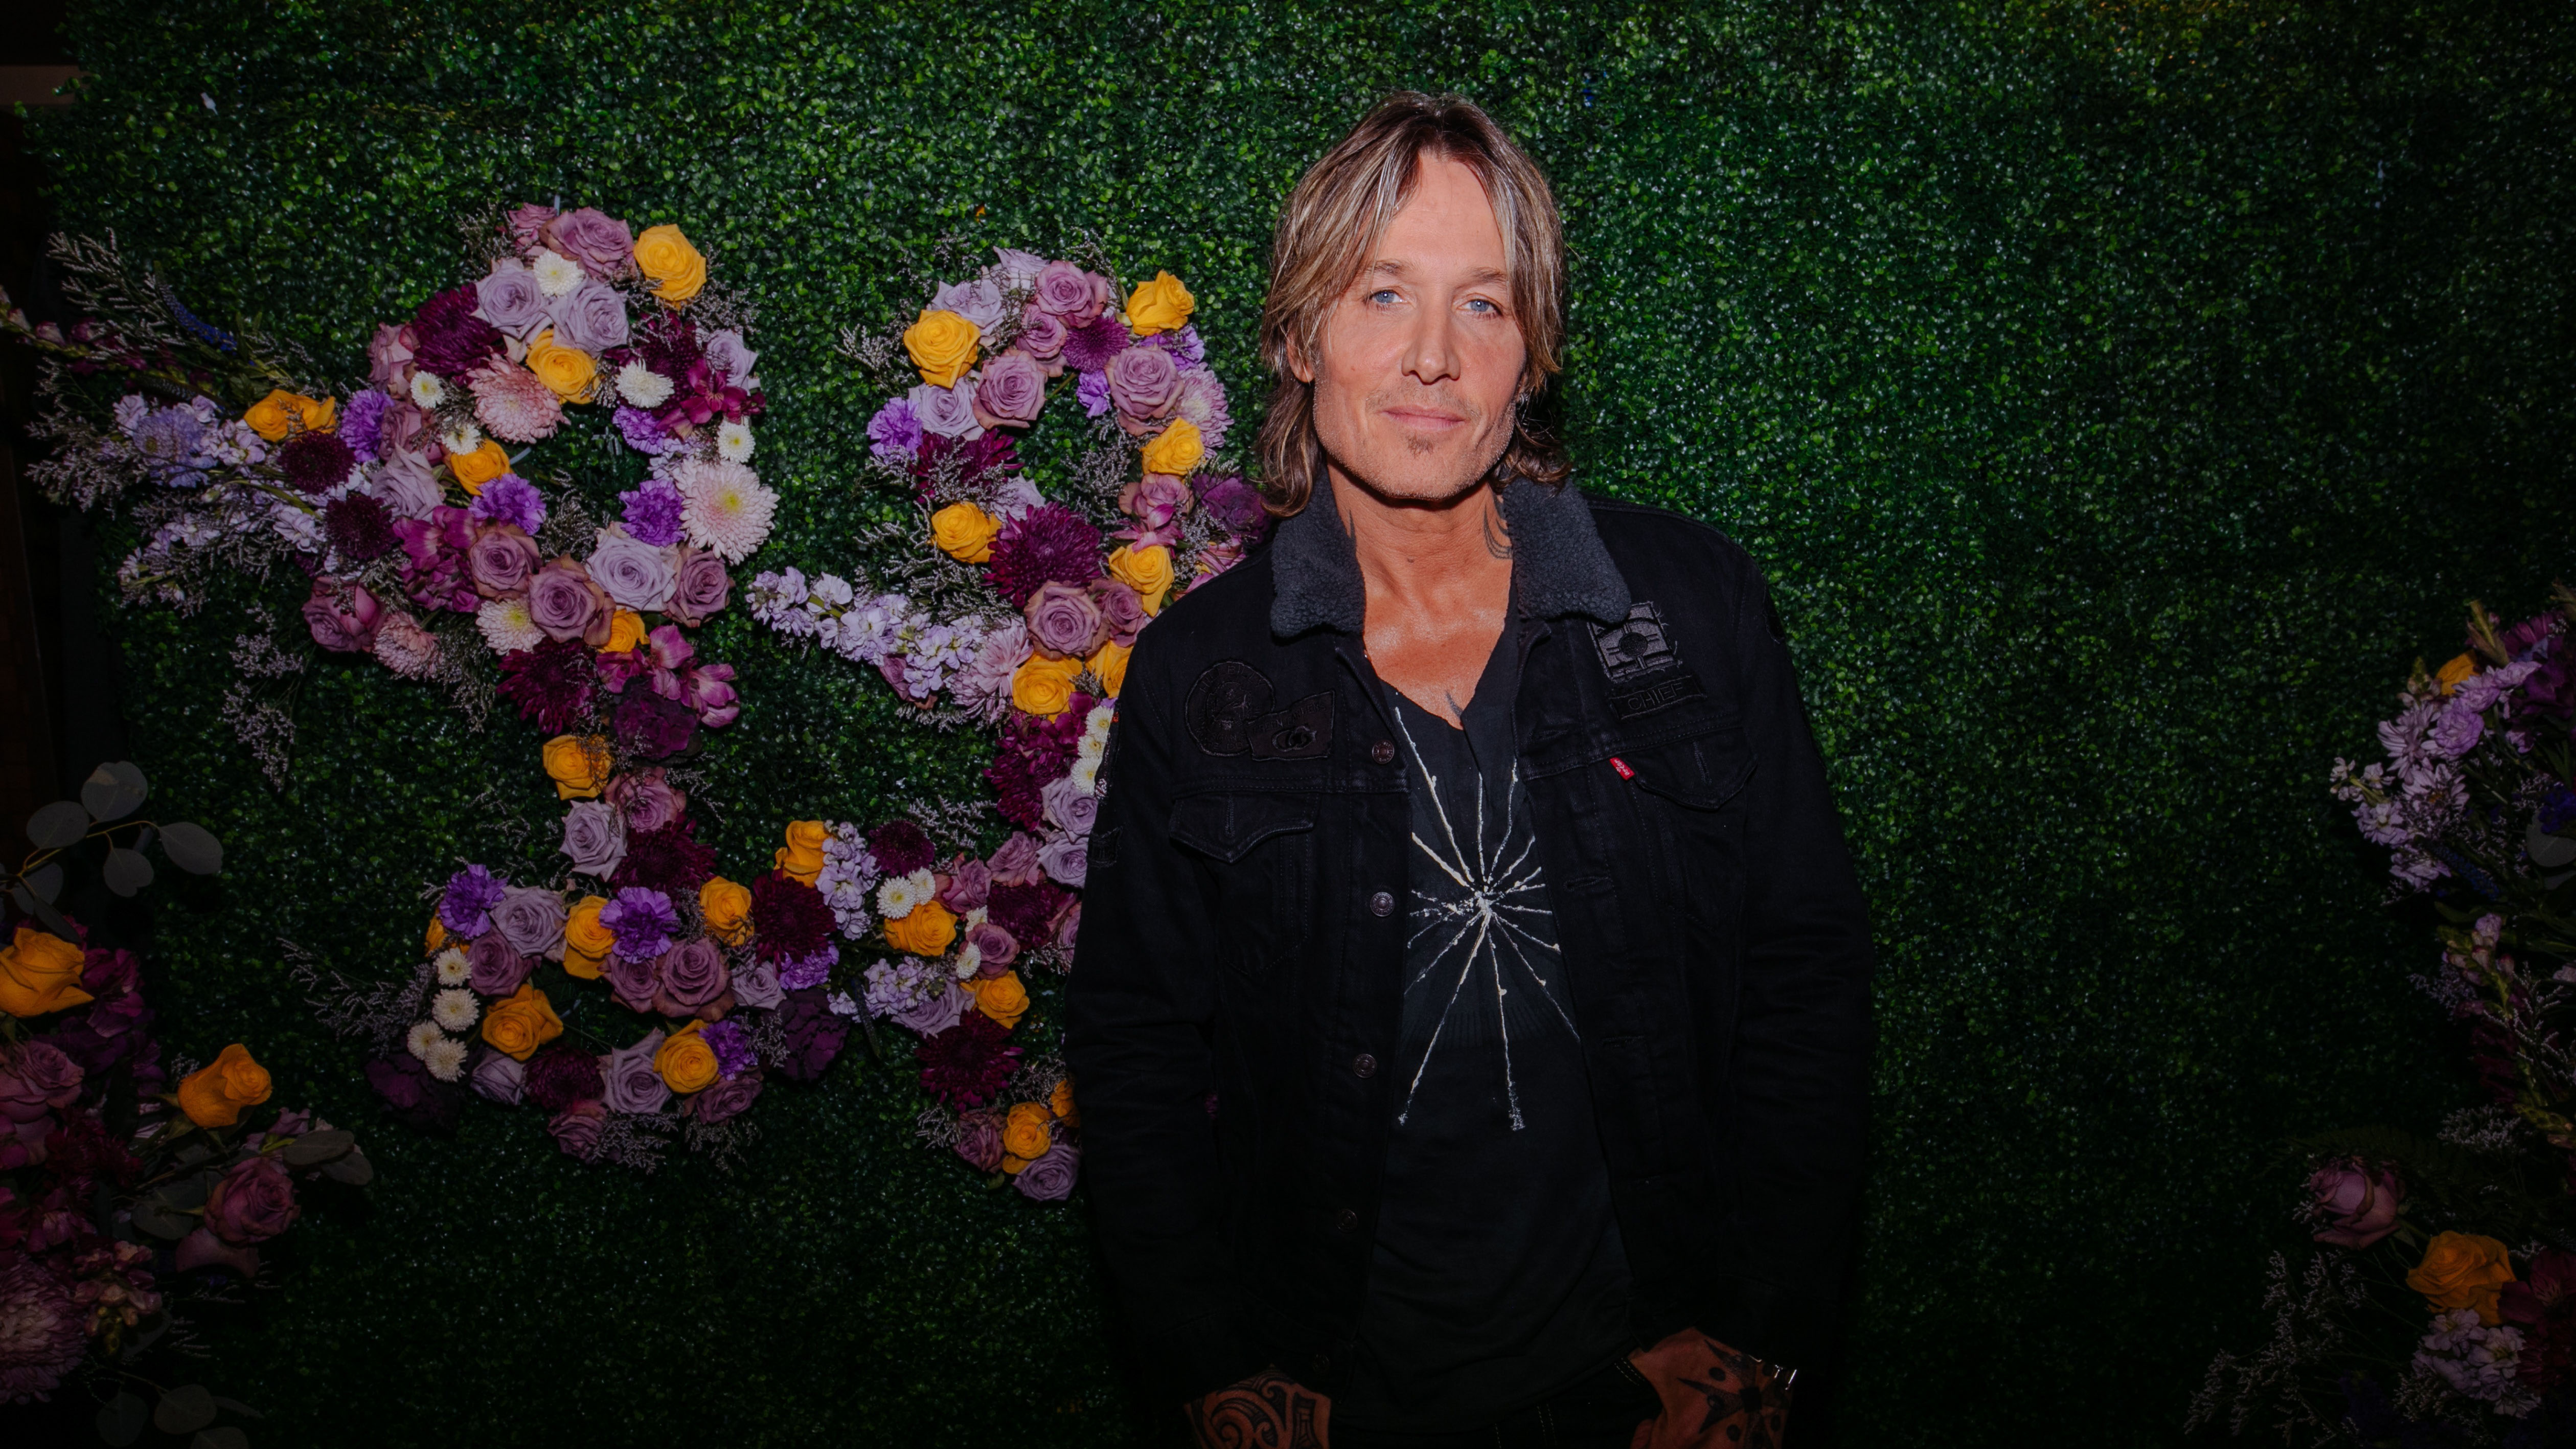 NASHVILLE, TENNESSEE - OCTOBER 30: Keith Urban attends CMT Coal Miner's Daughter: A Celebration of the Life & Music of Loretta Lynn at Grand Ole Opry on October 30, 2022 in Nashville, Tennessee.